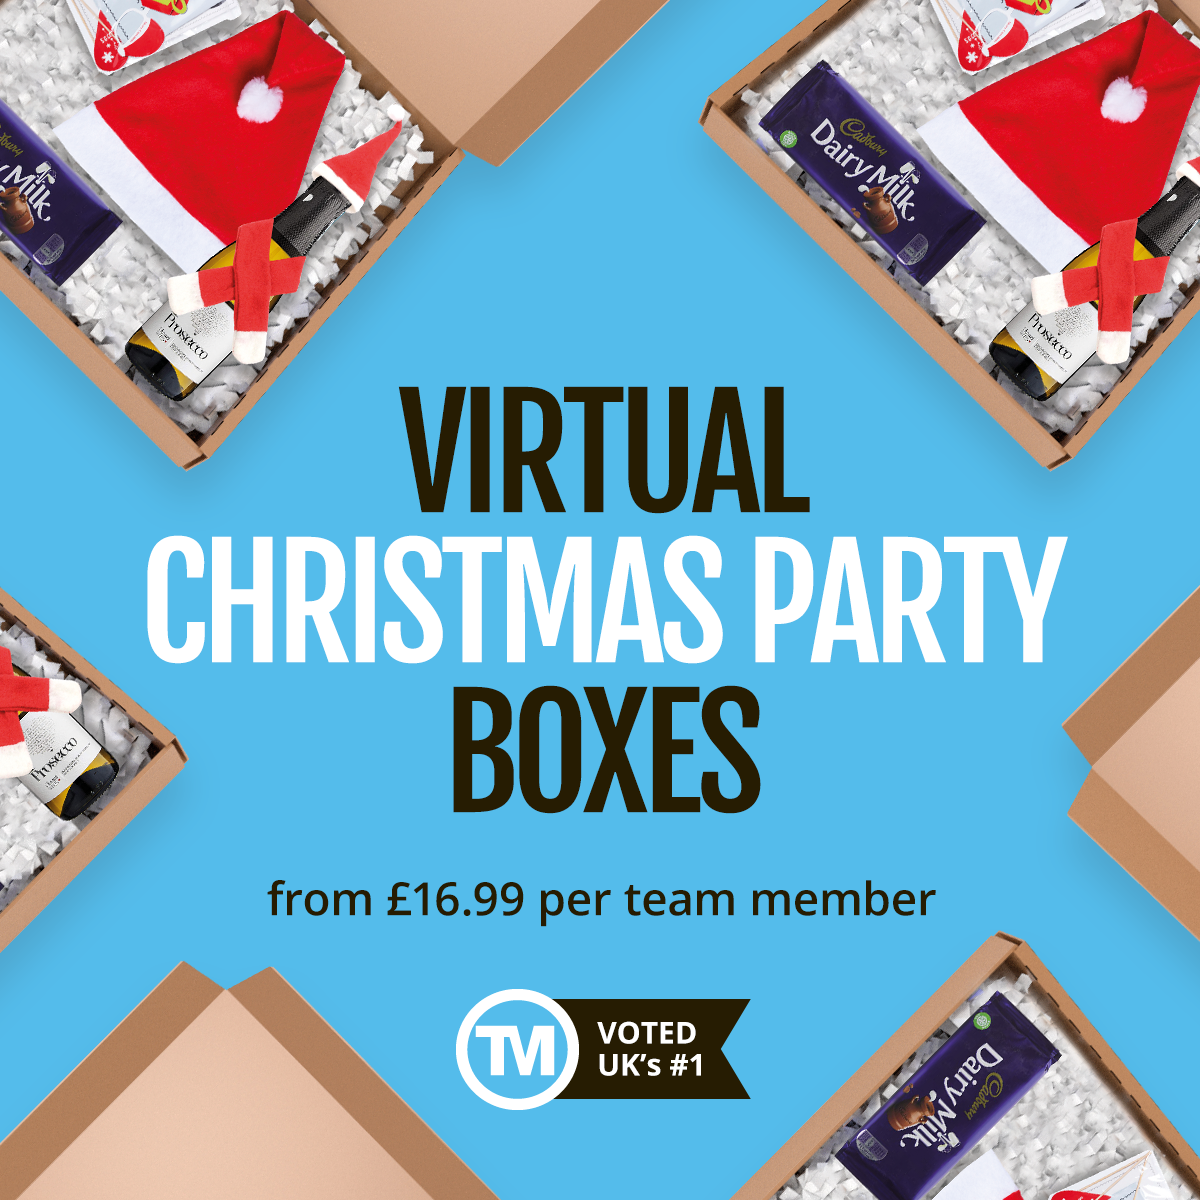 Virtual Christmas Party Boxes for businesses